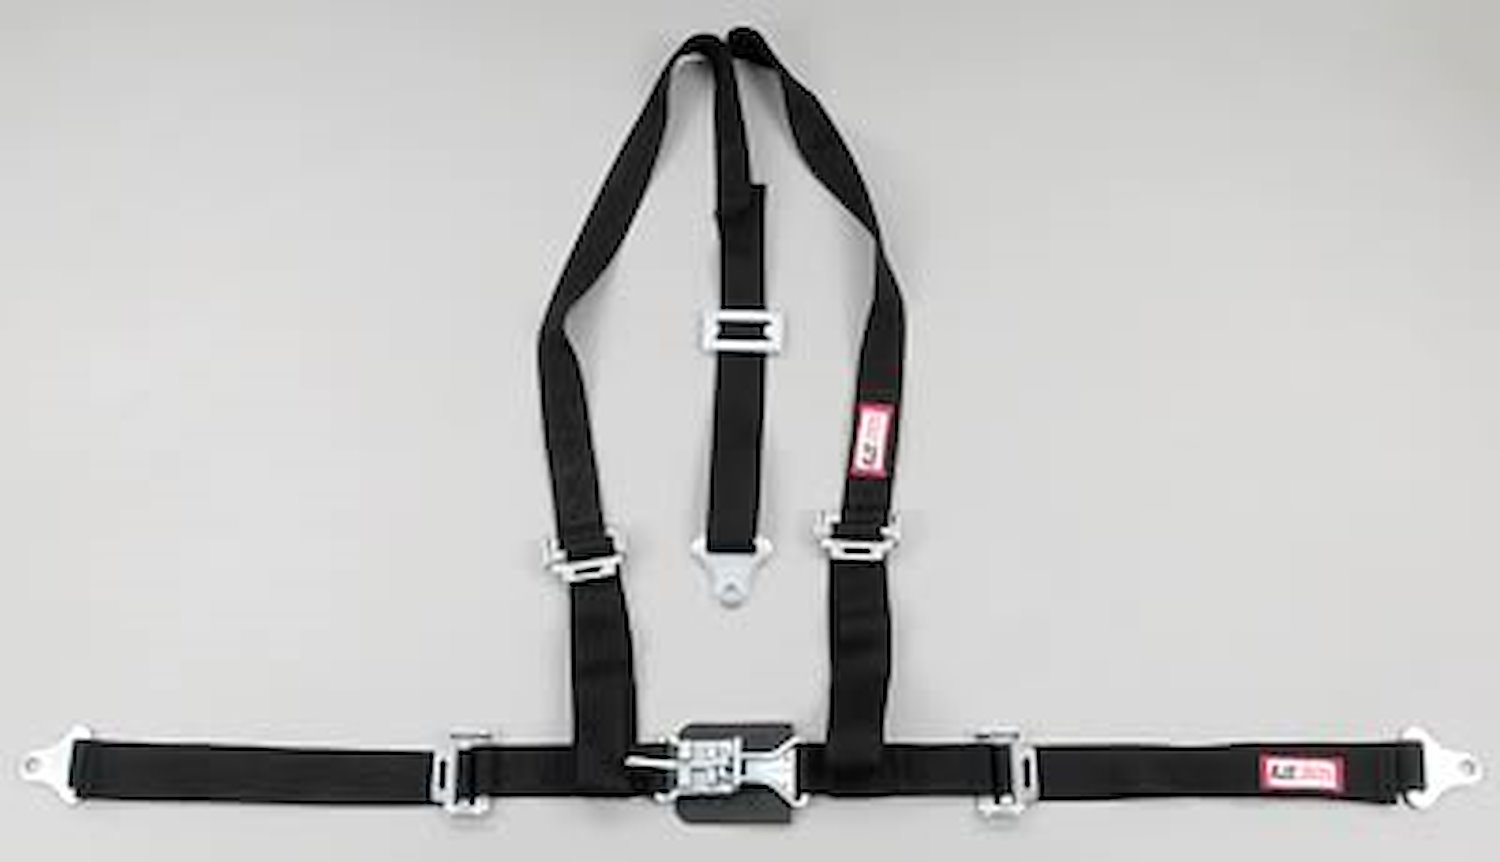 NON-SFI L&L HARNESS 2 PULL UP Lap Belt SEWN IN 2 S.H. Individual ROLL BAR Mount w/STERNUM STRAP ALL WRAP ENDS BLACK